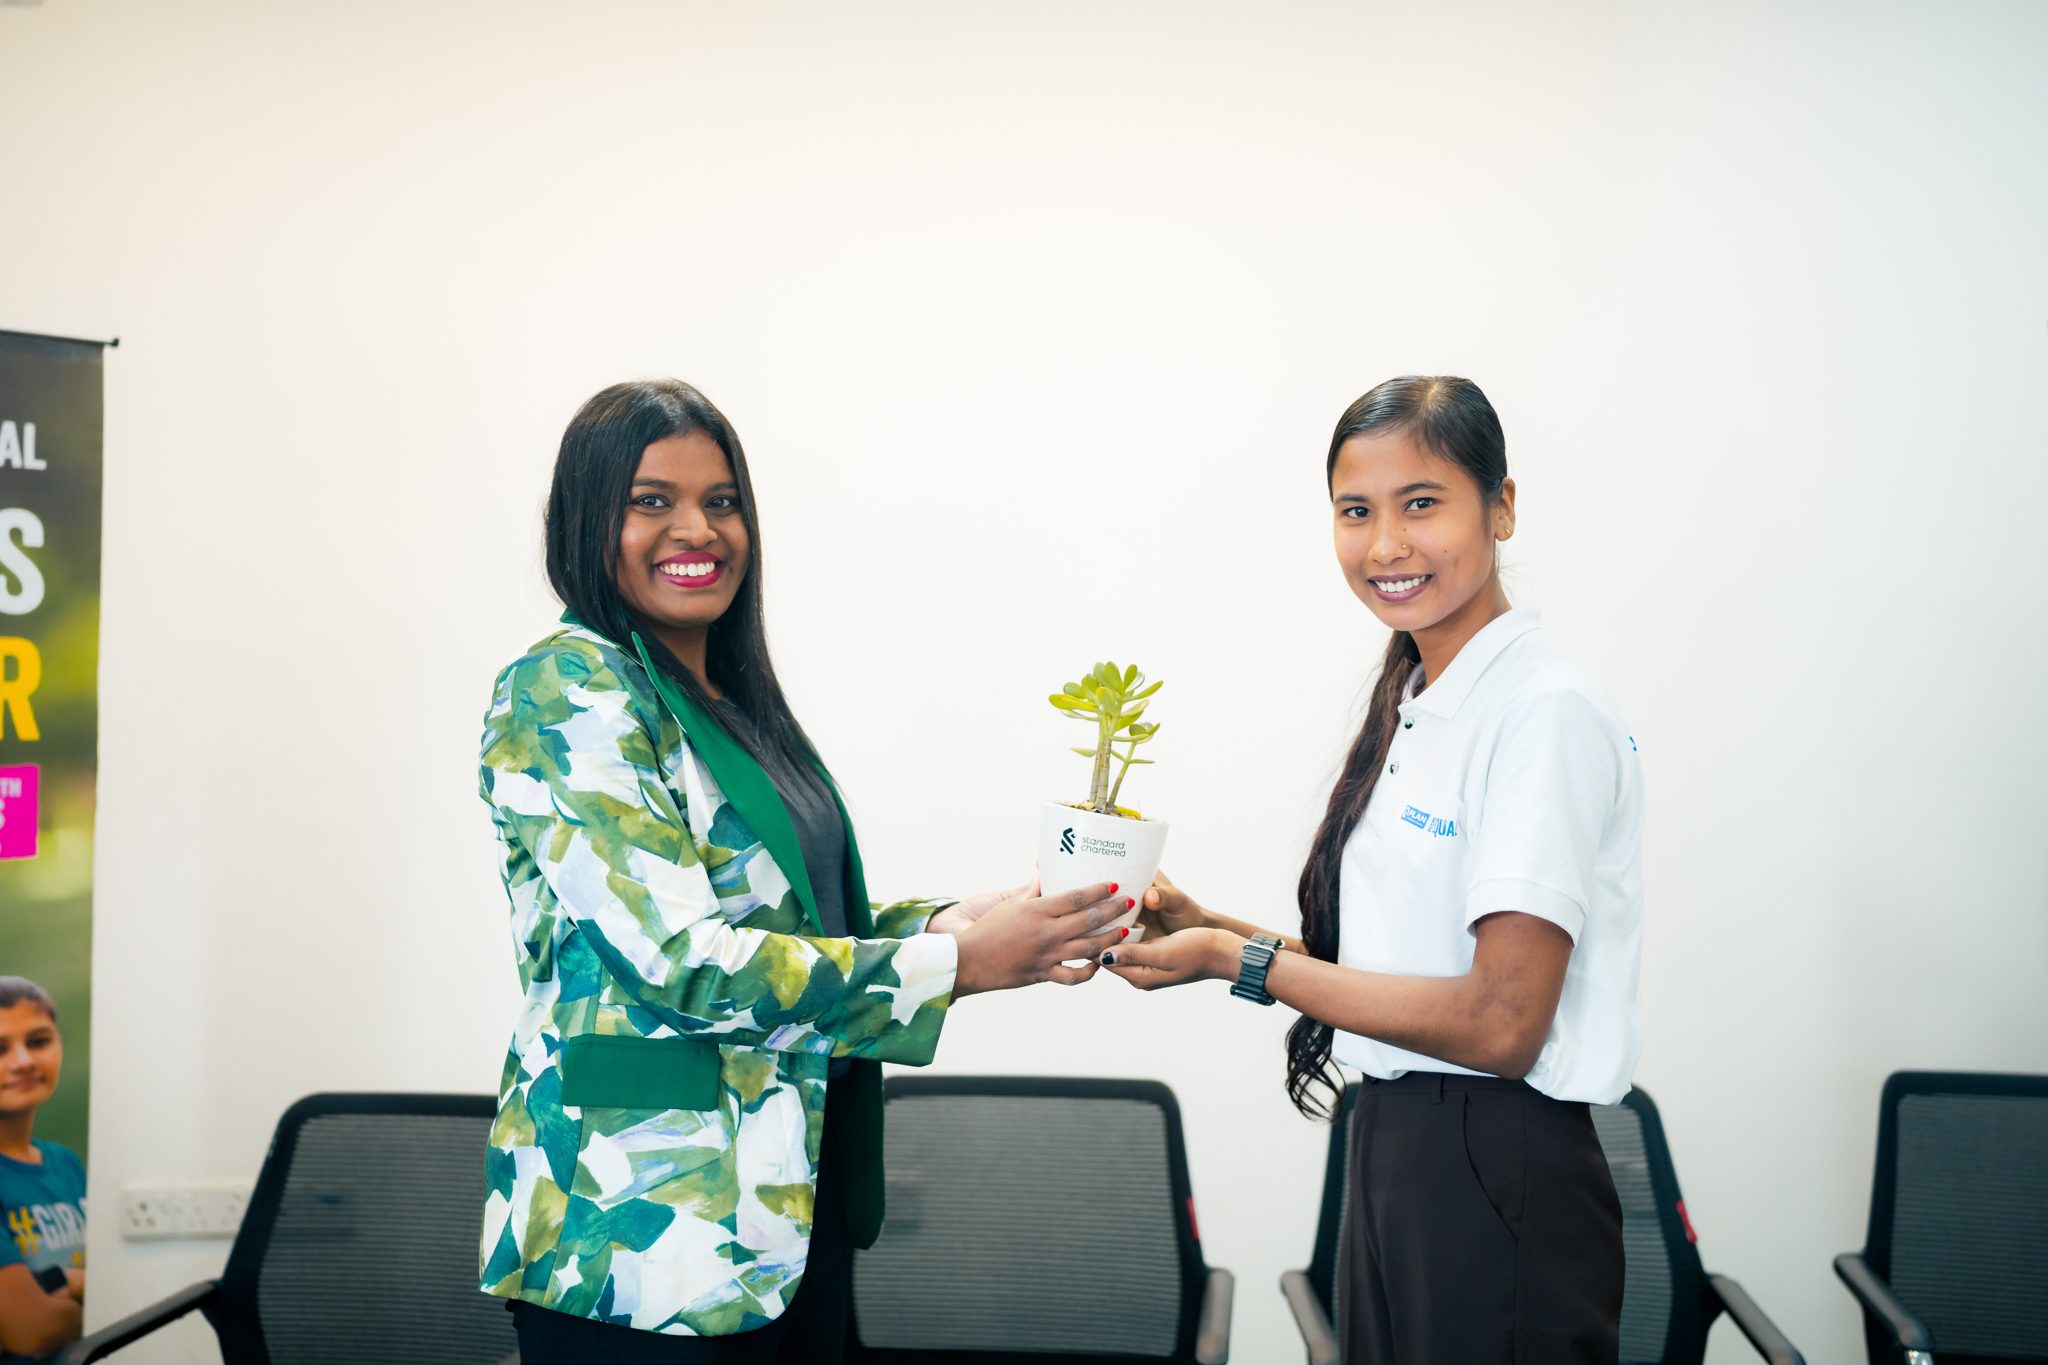 Akriti receives a plant as token of love from Standard Chartered.